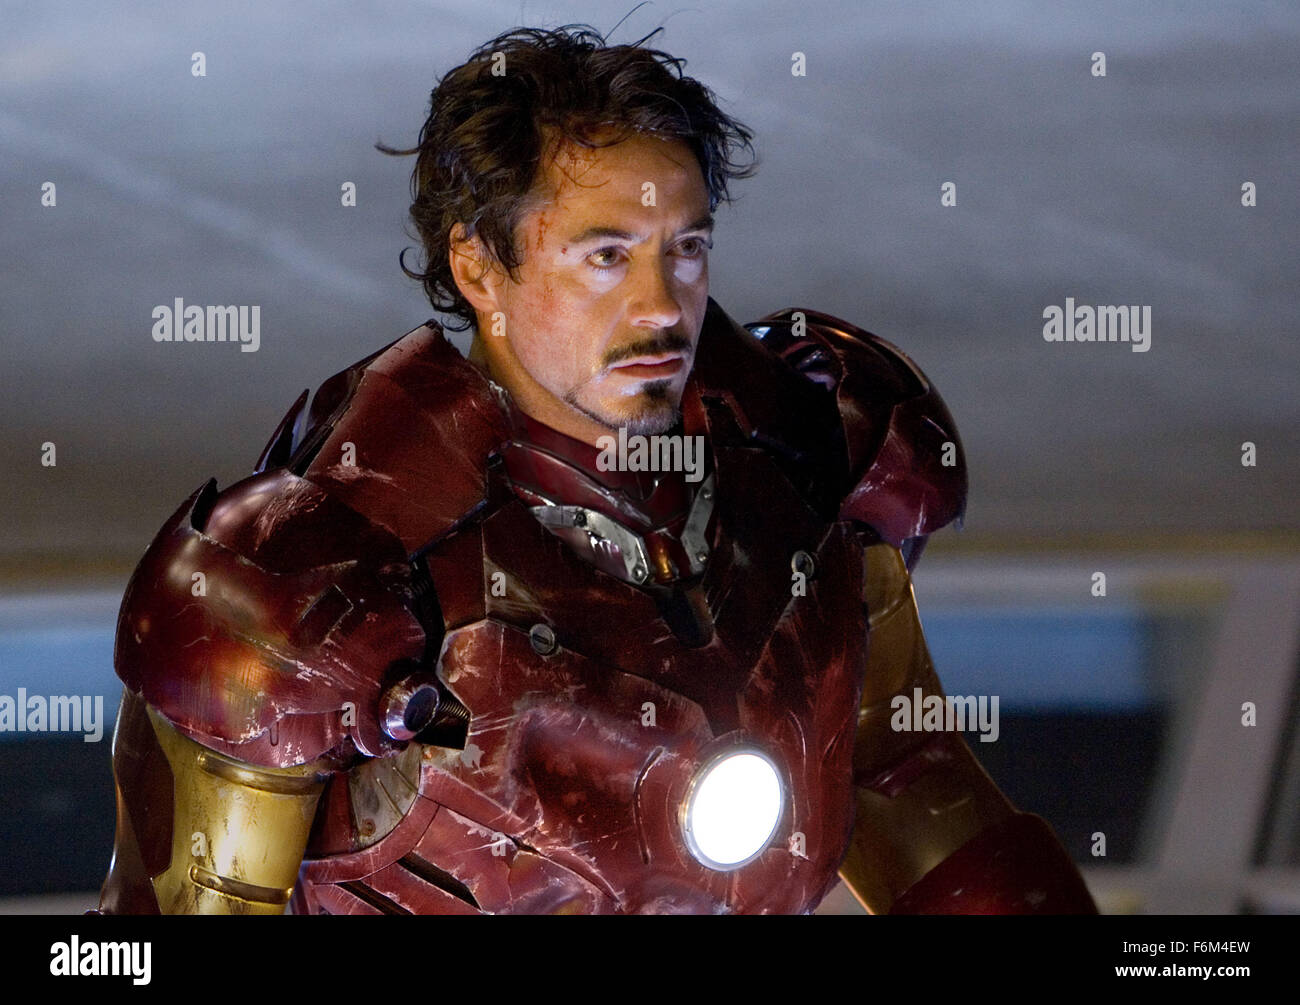 RELEASE DATE: May 2, 2008. MOVIE TITLE: Iron Man. STUDIO: Marvel